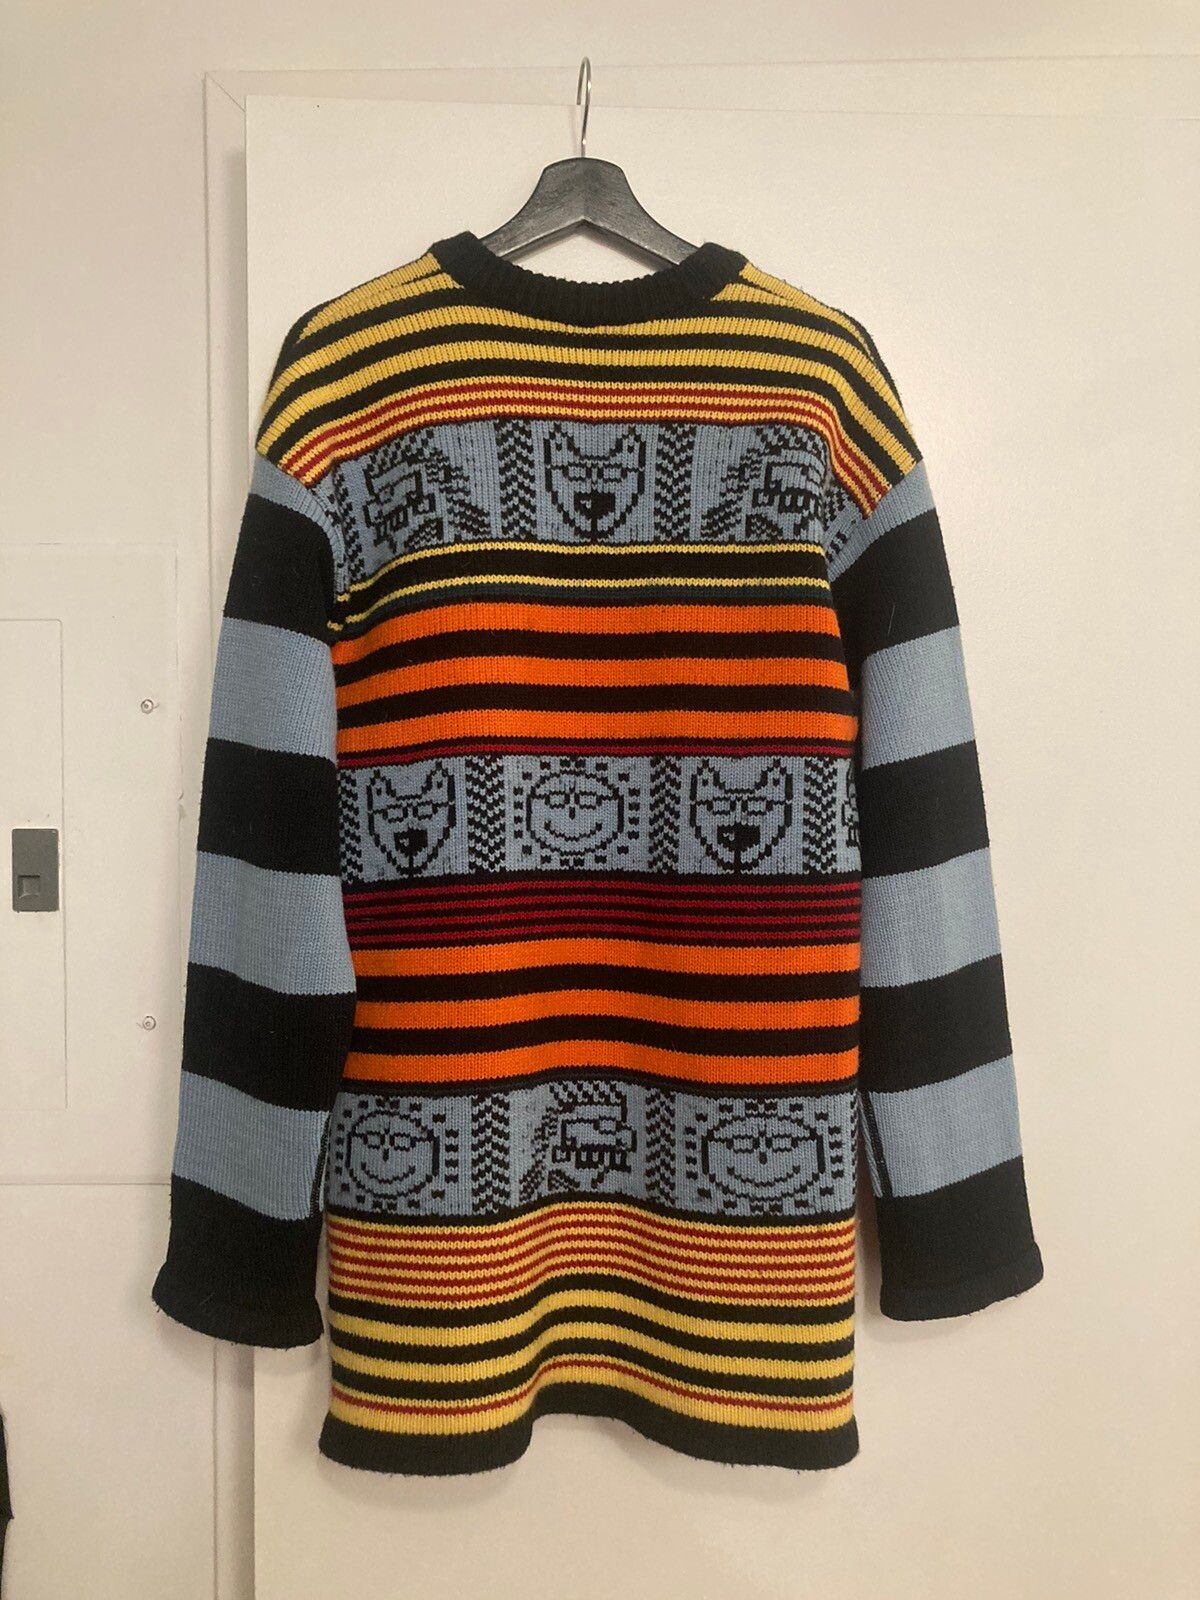 Walter Van Beirendonck 88AW Shoot the Star Knit | Grailed